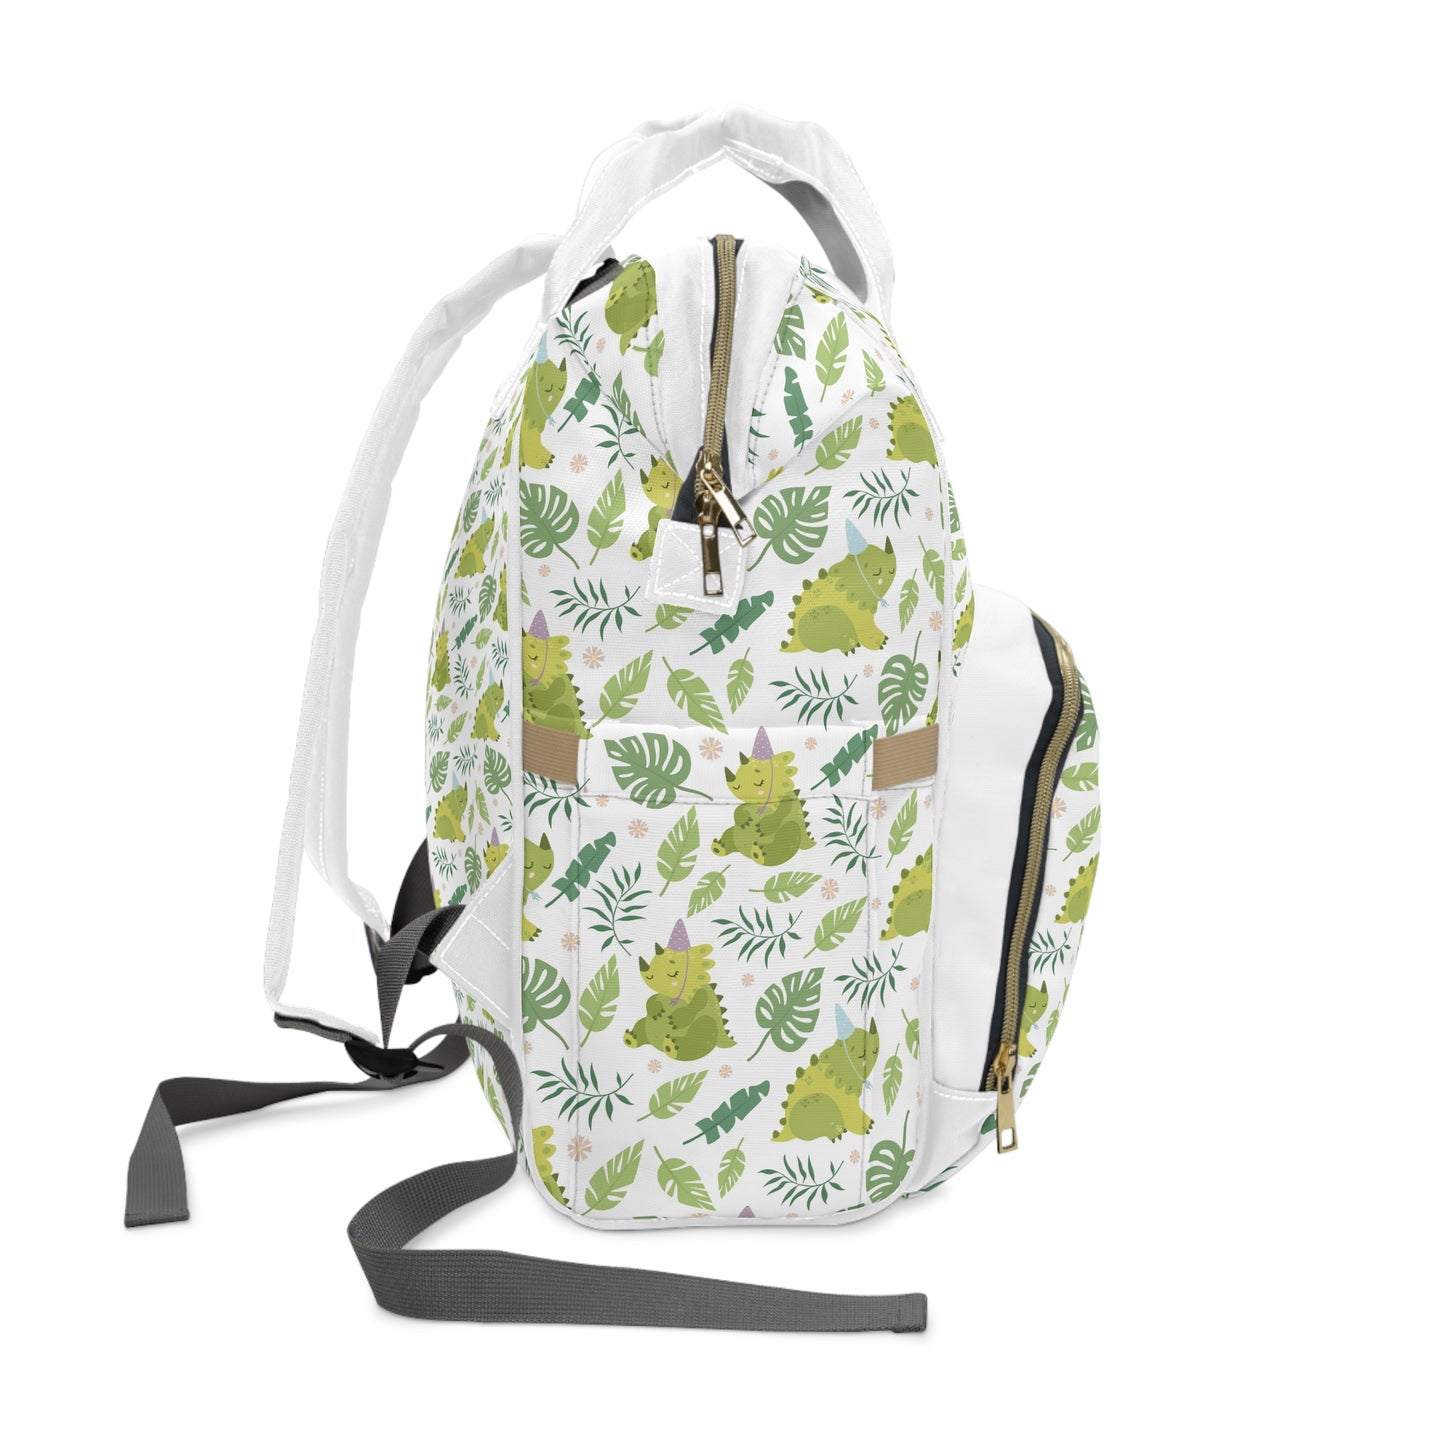 Niccie Dino: Stylish Backpack with Palm Leaf Pattern